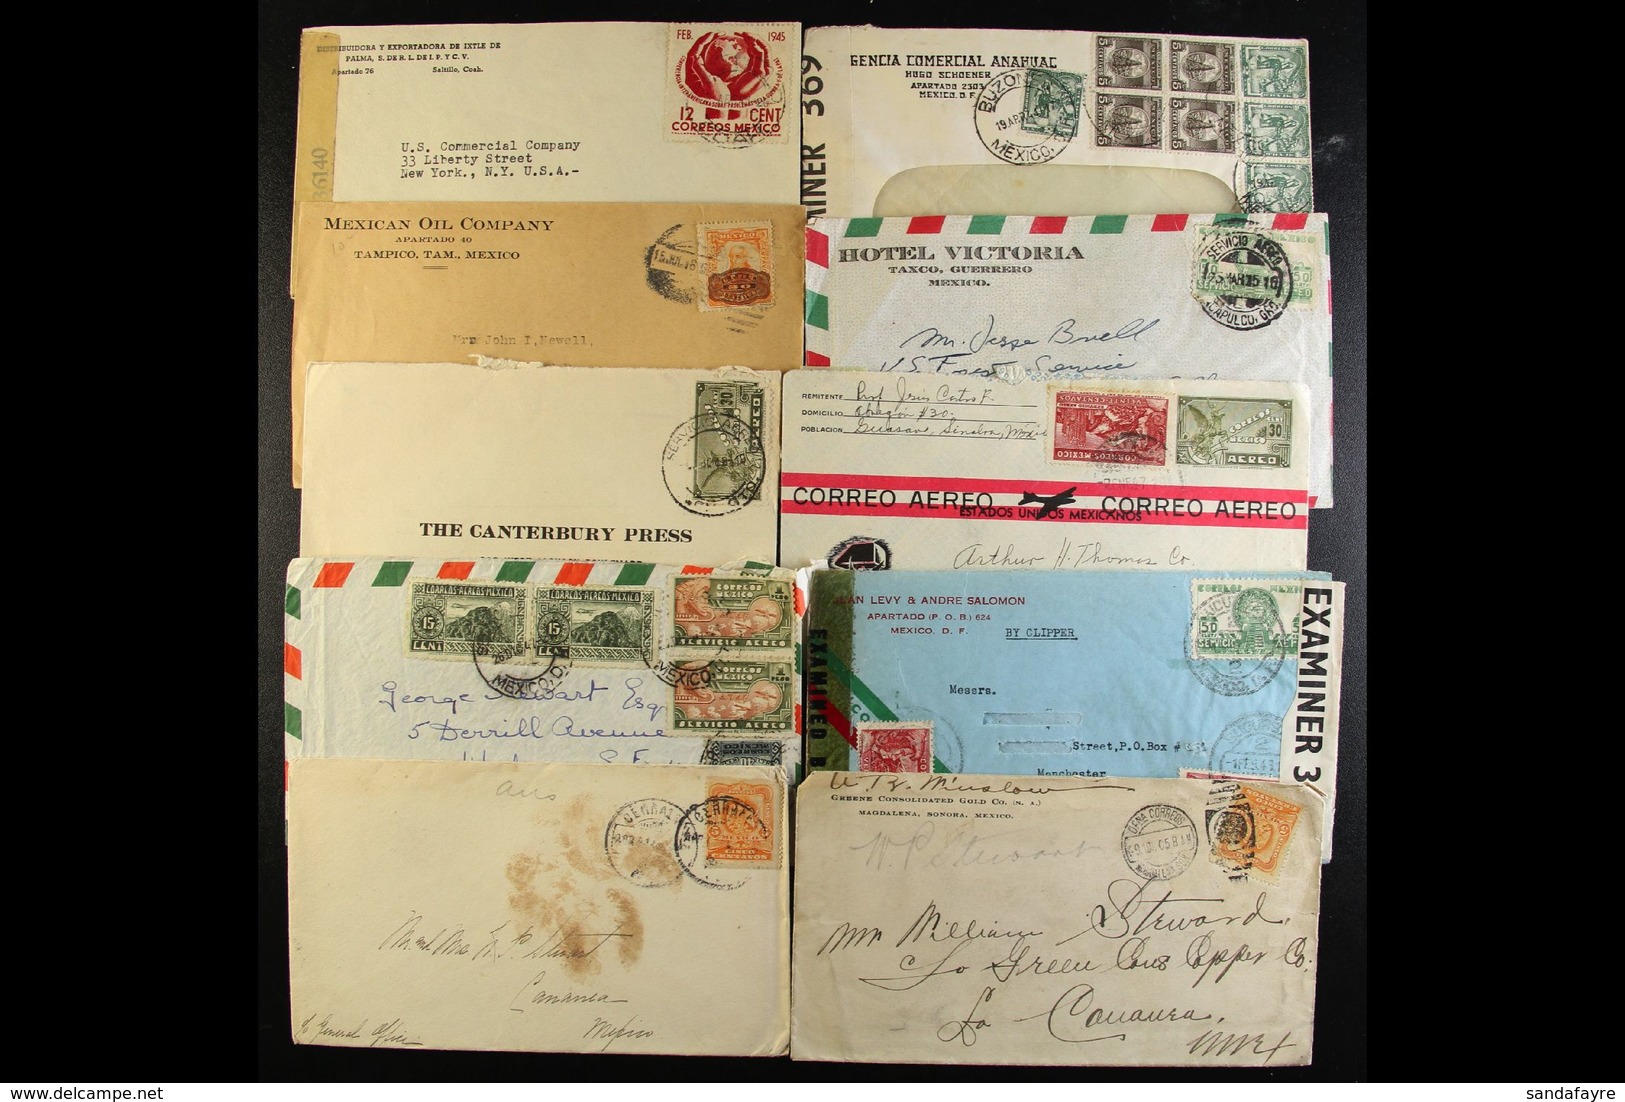 1900's To 1950's COMMERCIAL COVERS Interesting Accumulation, Includes A Few Cards And Fronts. Note Useful Flown And Regi - Mexico